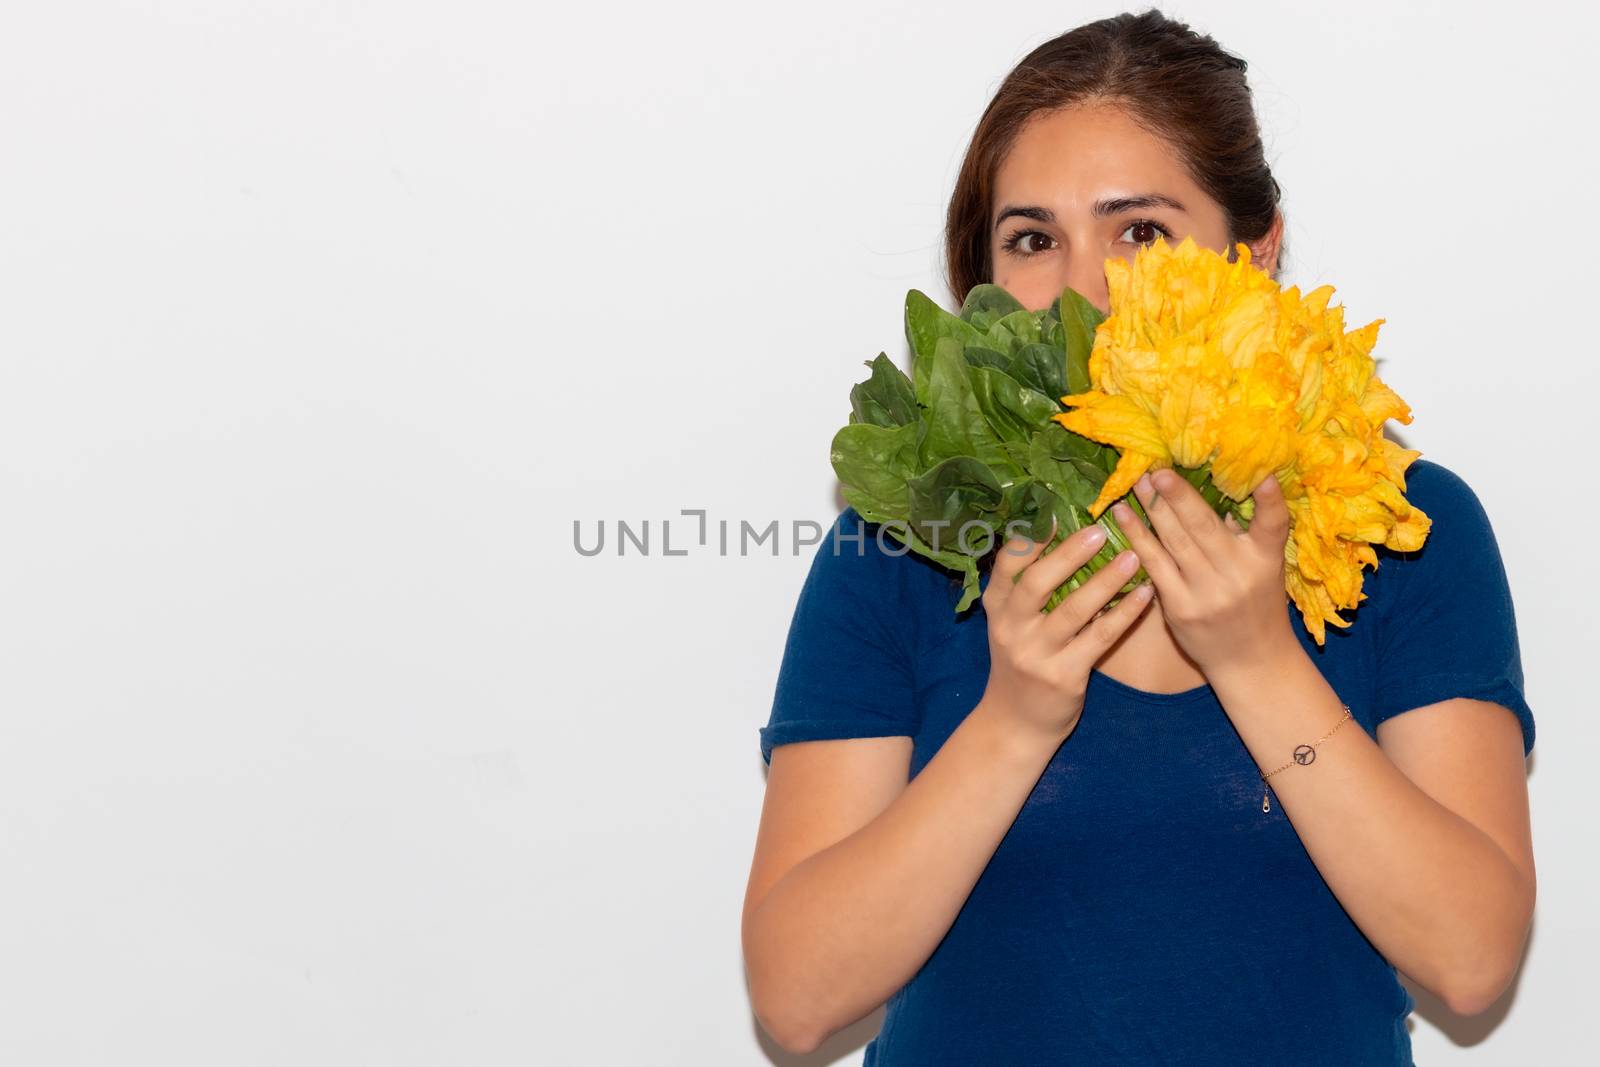 Real young man with a bunch of pumpkin blossom and spinach covering his face. Isolated on a white background. by leo_de_la_garza